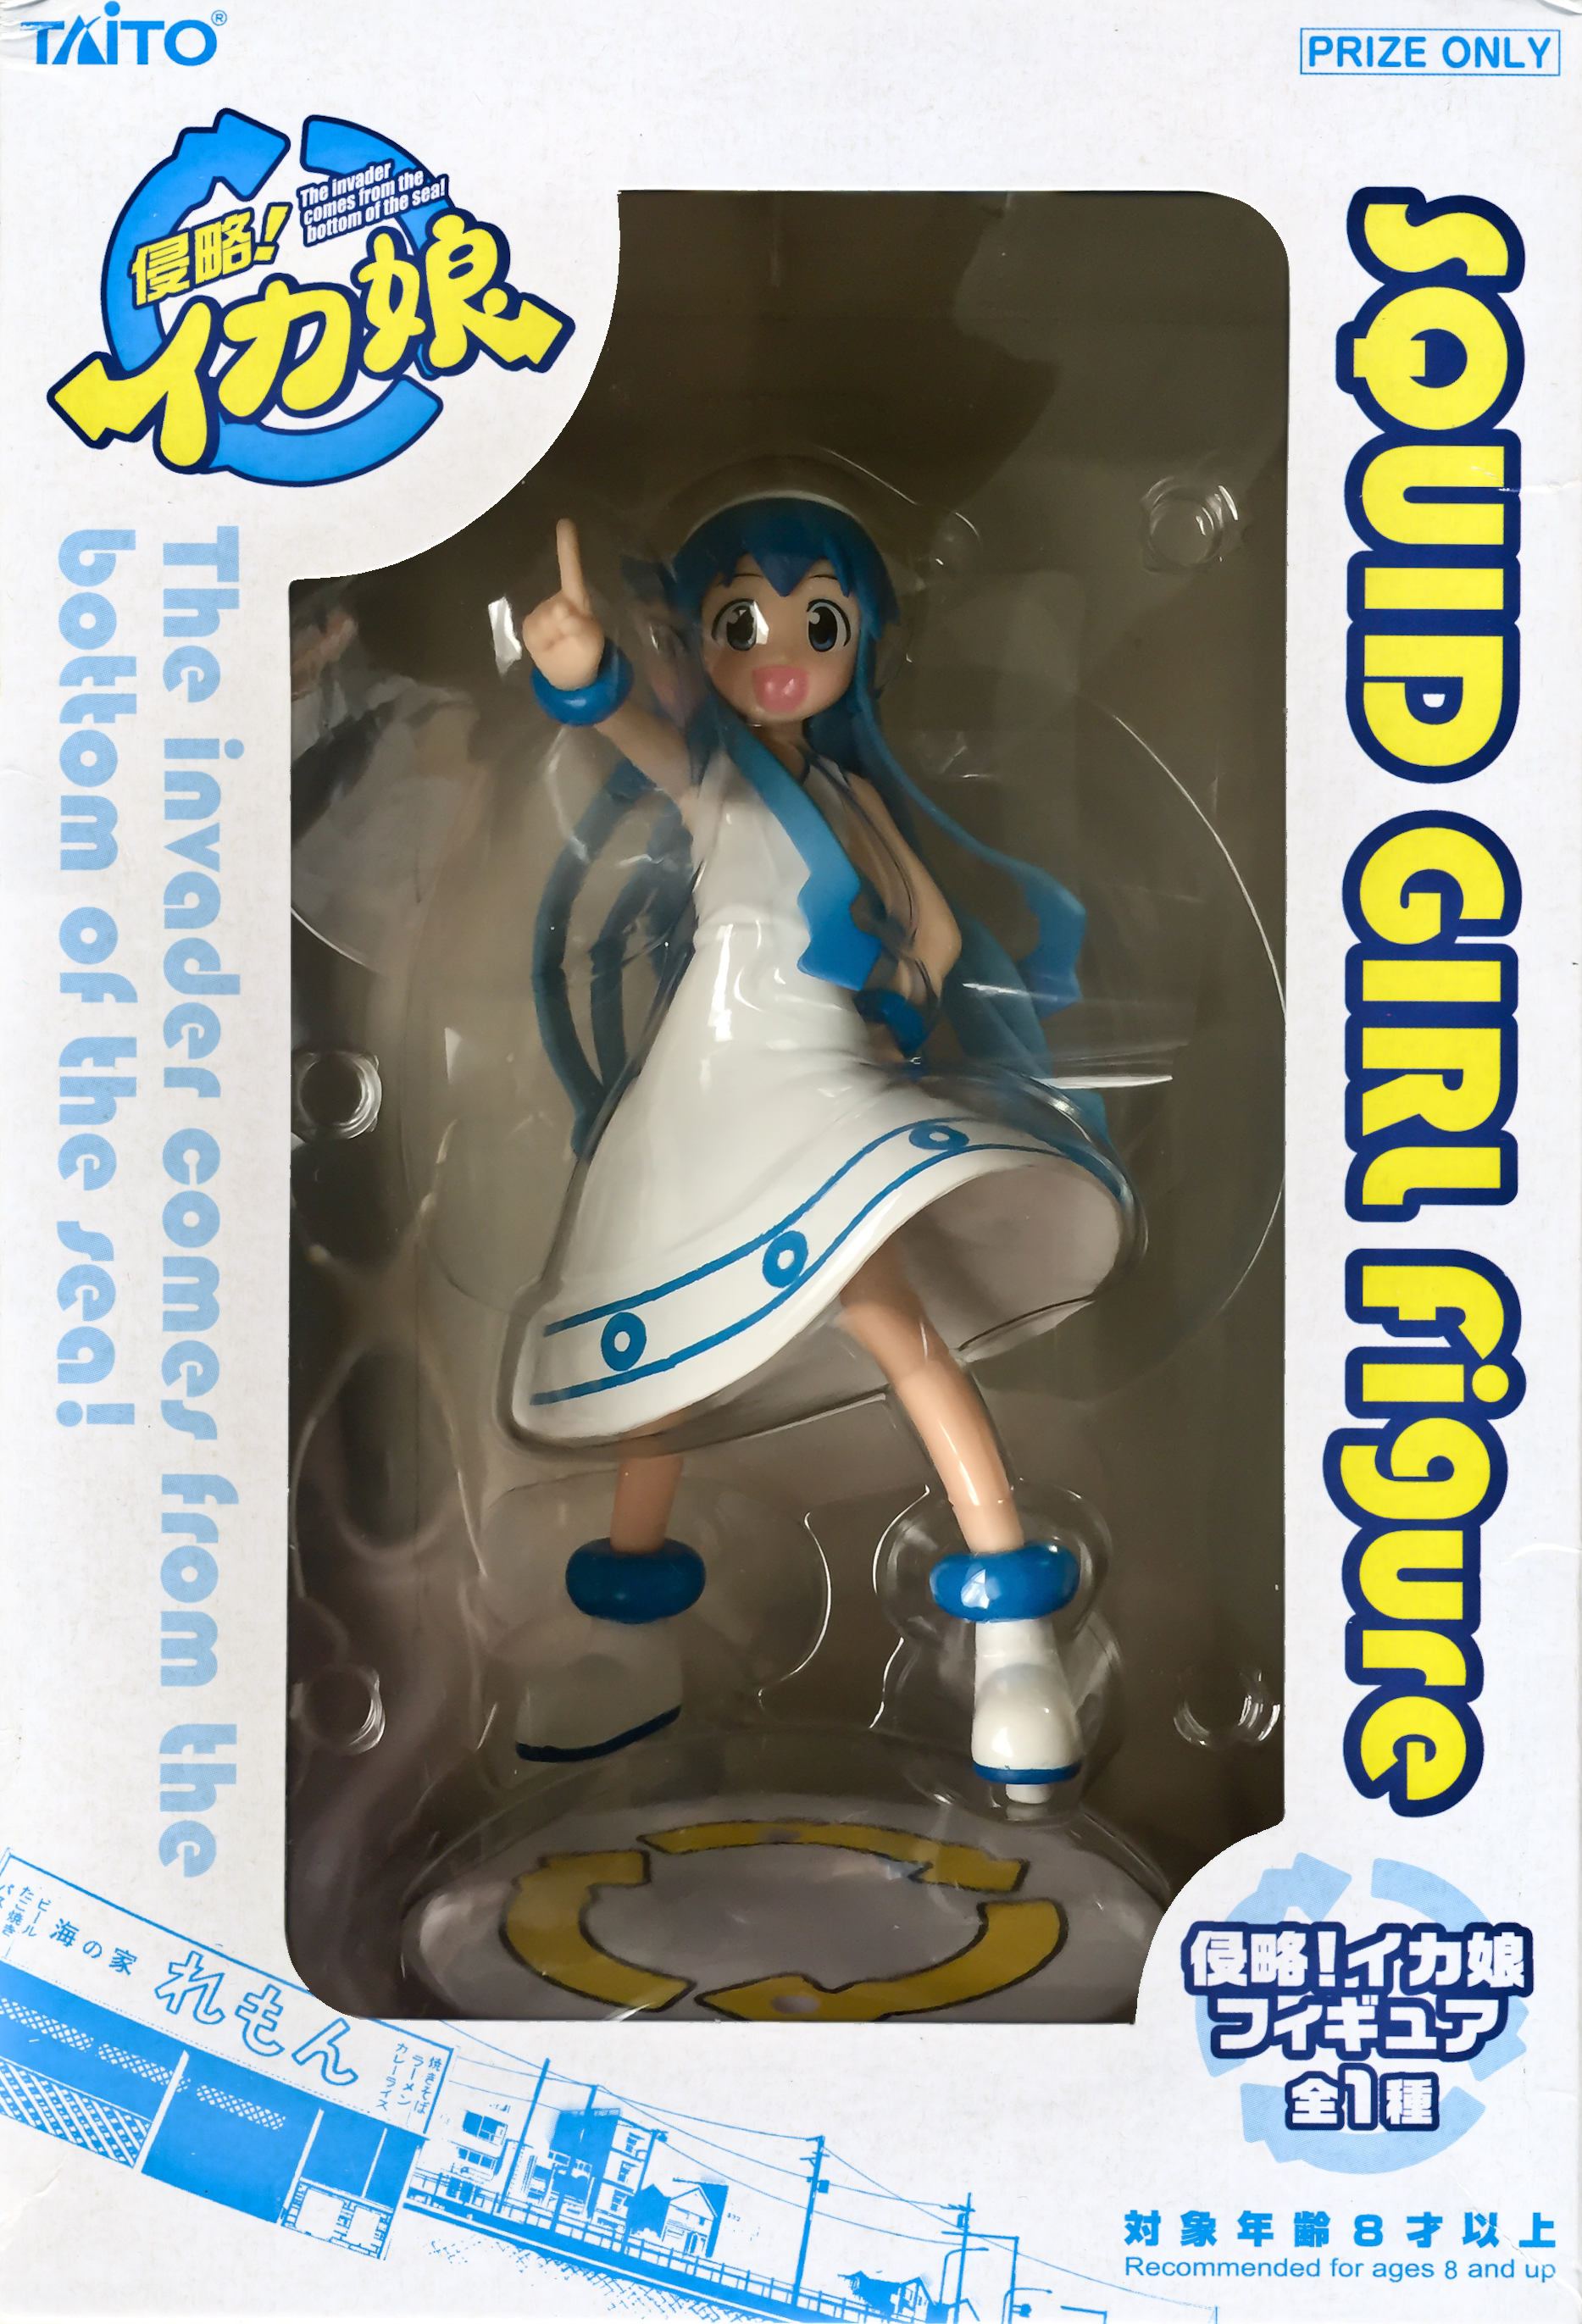 Squid Girl, Pointing, White Dress, Invasion!, Squid Girl, The invader comes from the bottom of the sea!, Taito